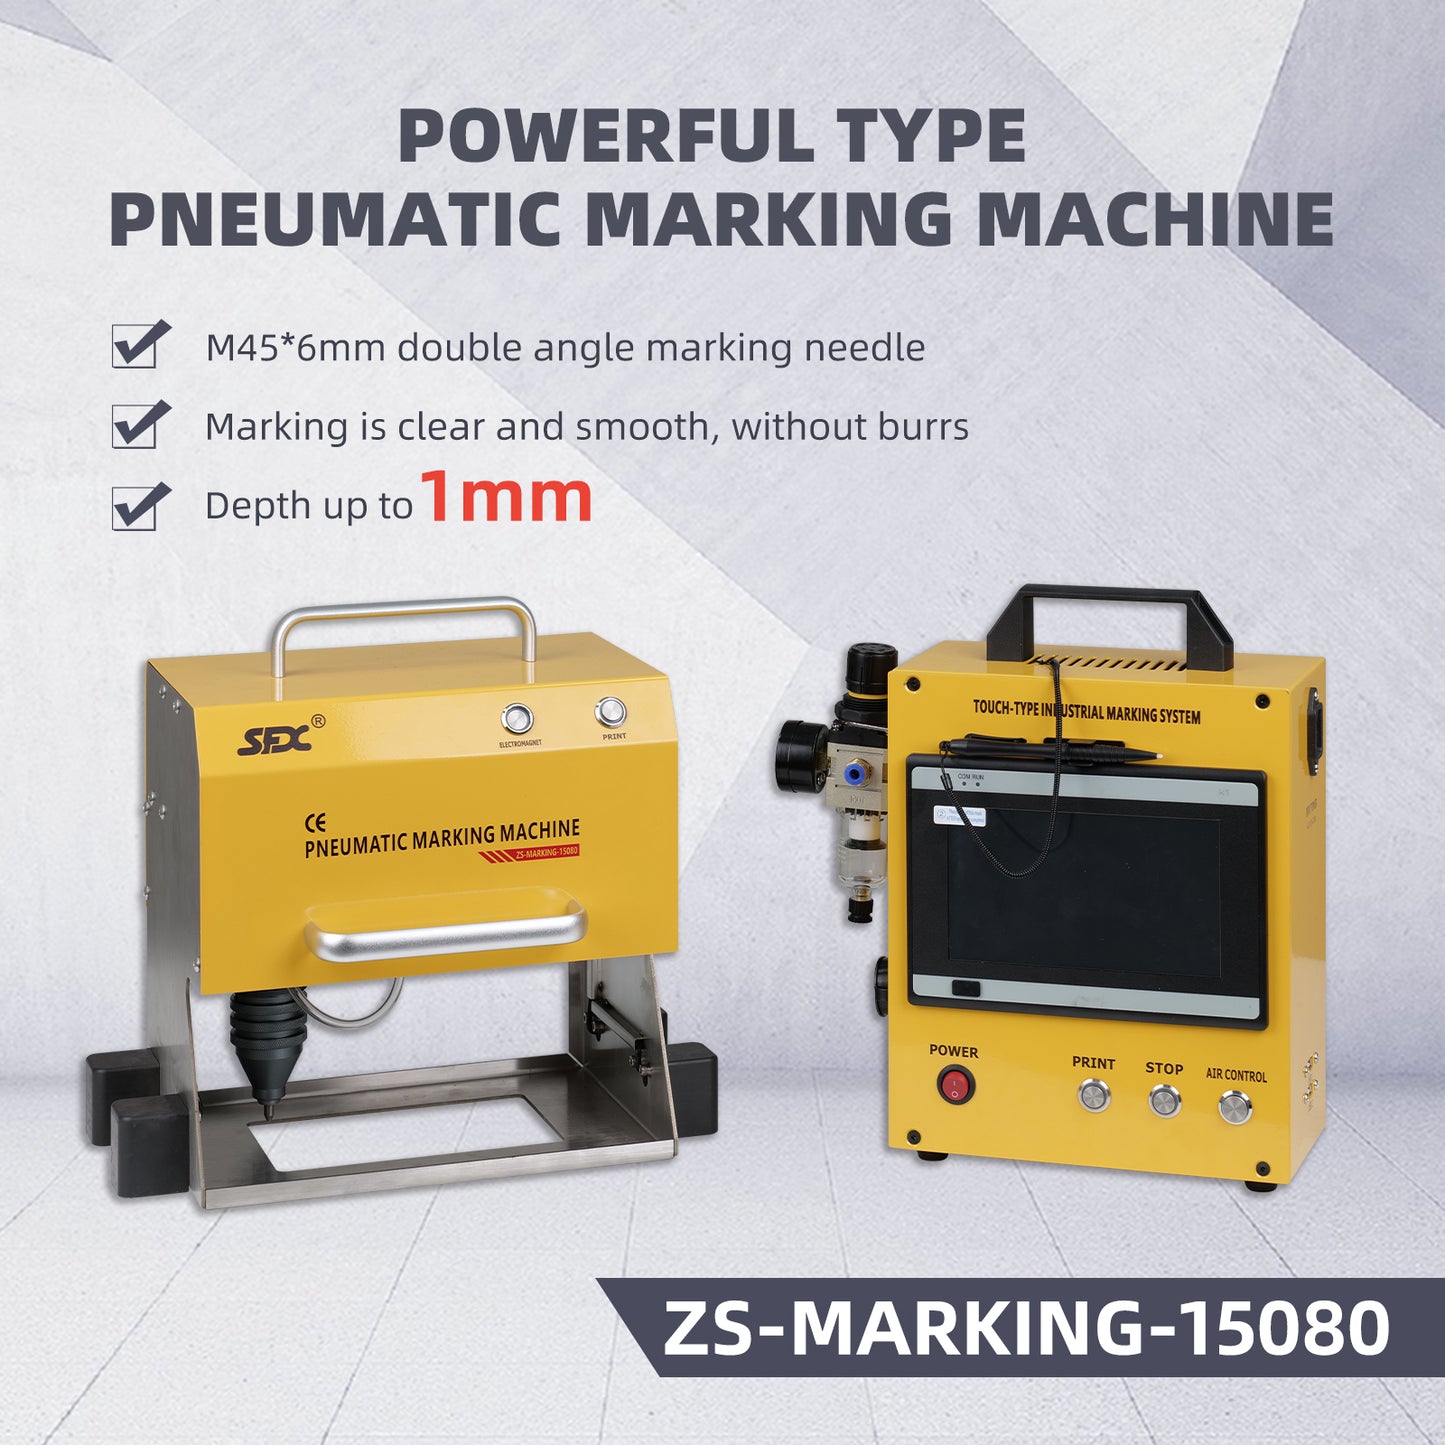 Portable Pneumatic Dot Peen Marking Machine For Metal Engraving Chassis Number VIN Code Marking,US Stock